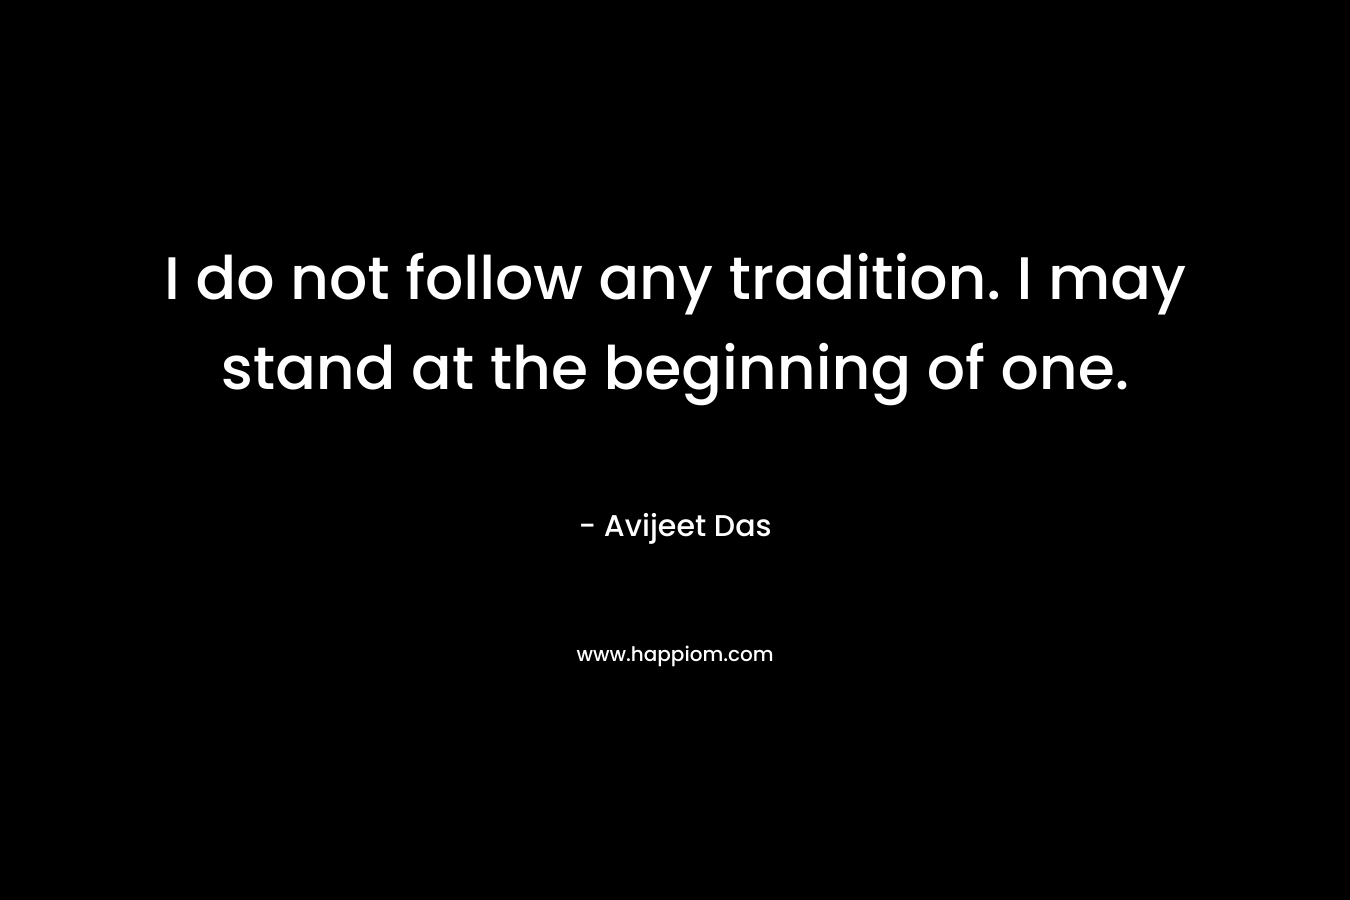 I do not follow any tradition. I may stand at the beginning of one.